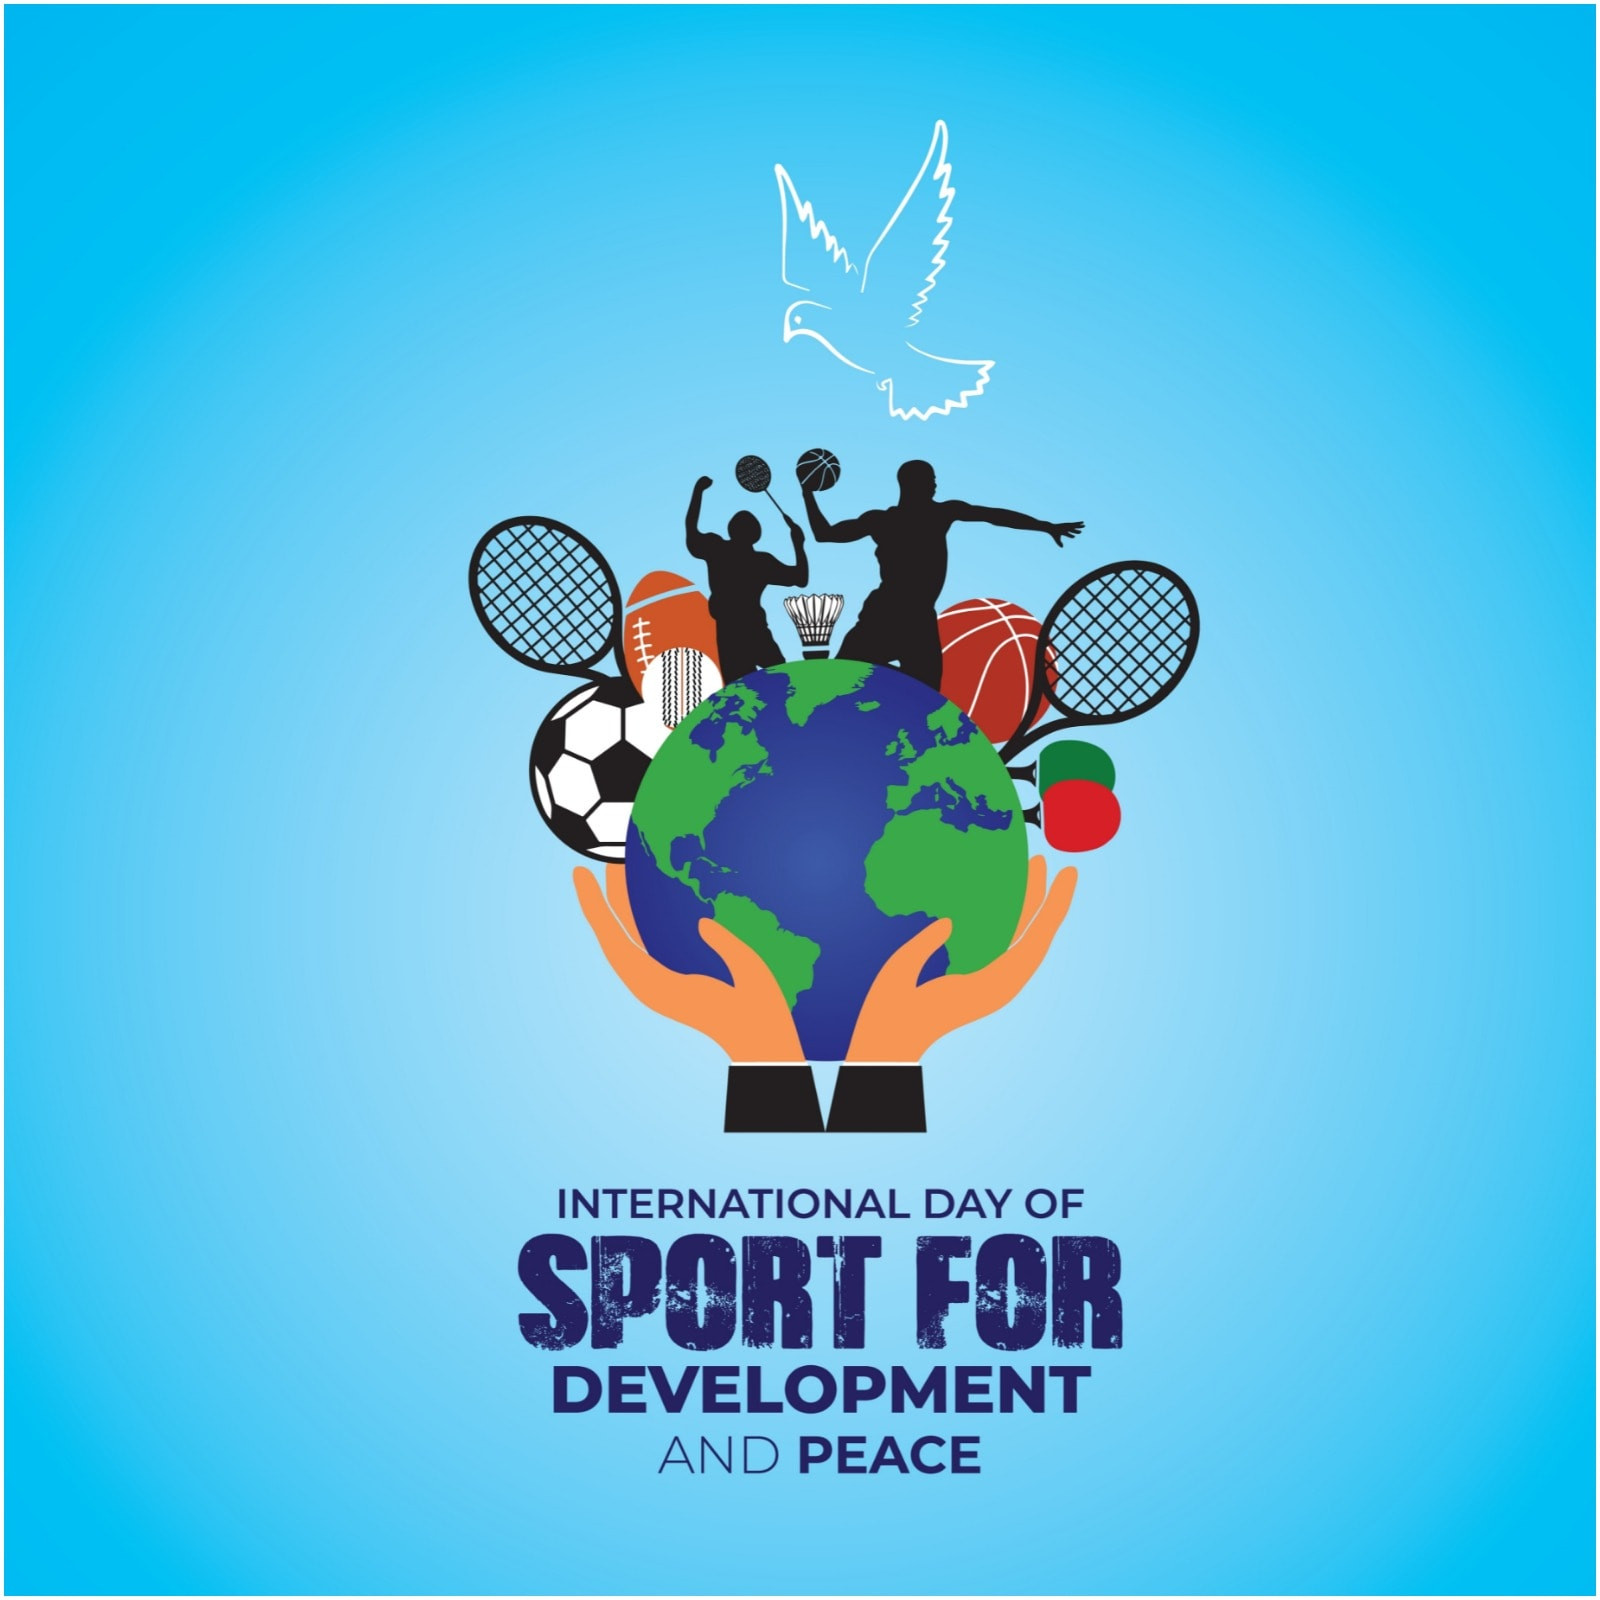 International Day of Sport for Development and Peace 2022: History, Theme, and Significance